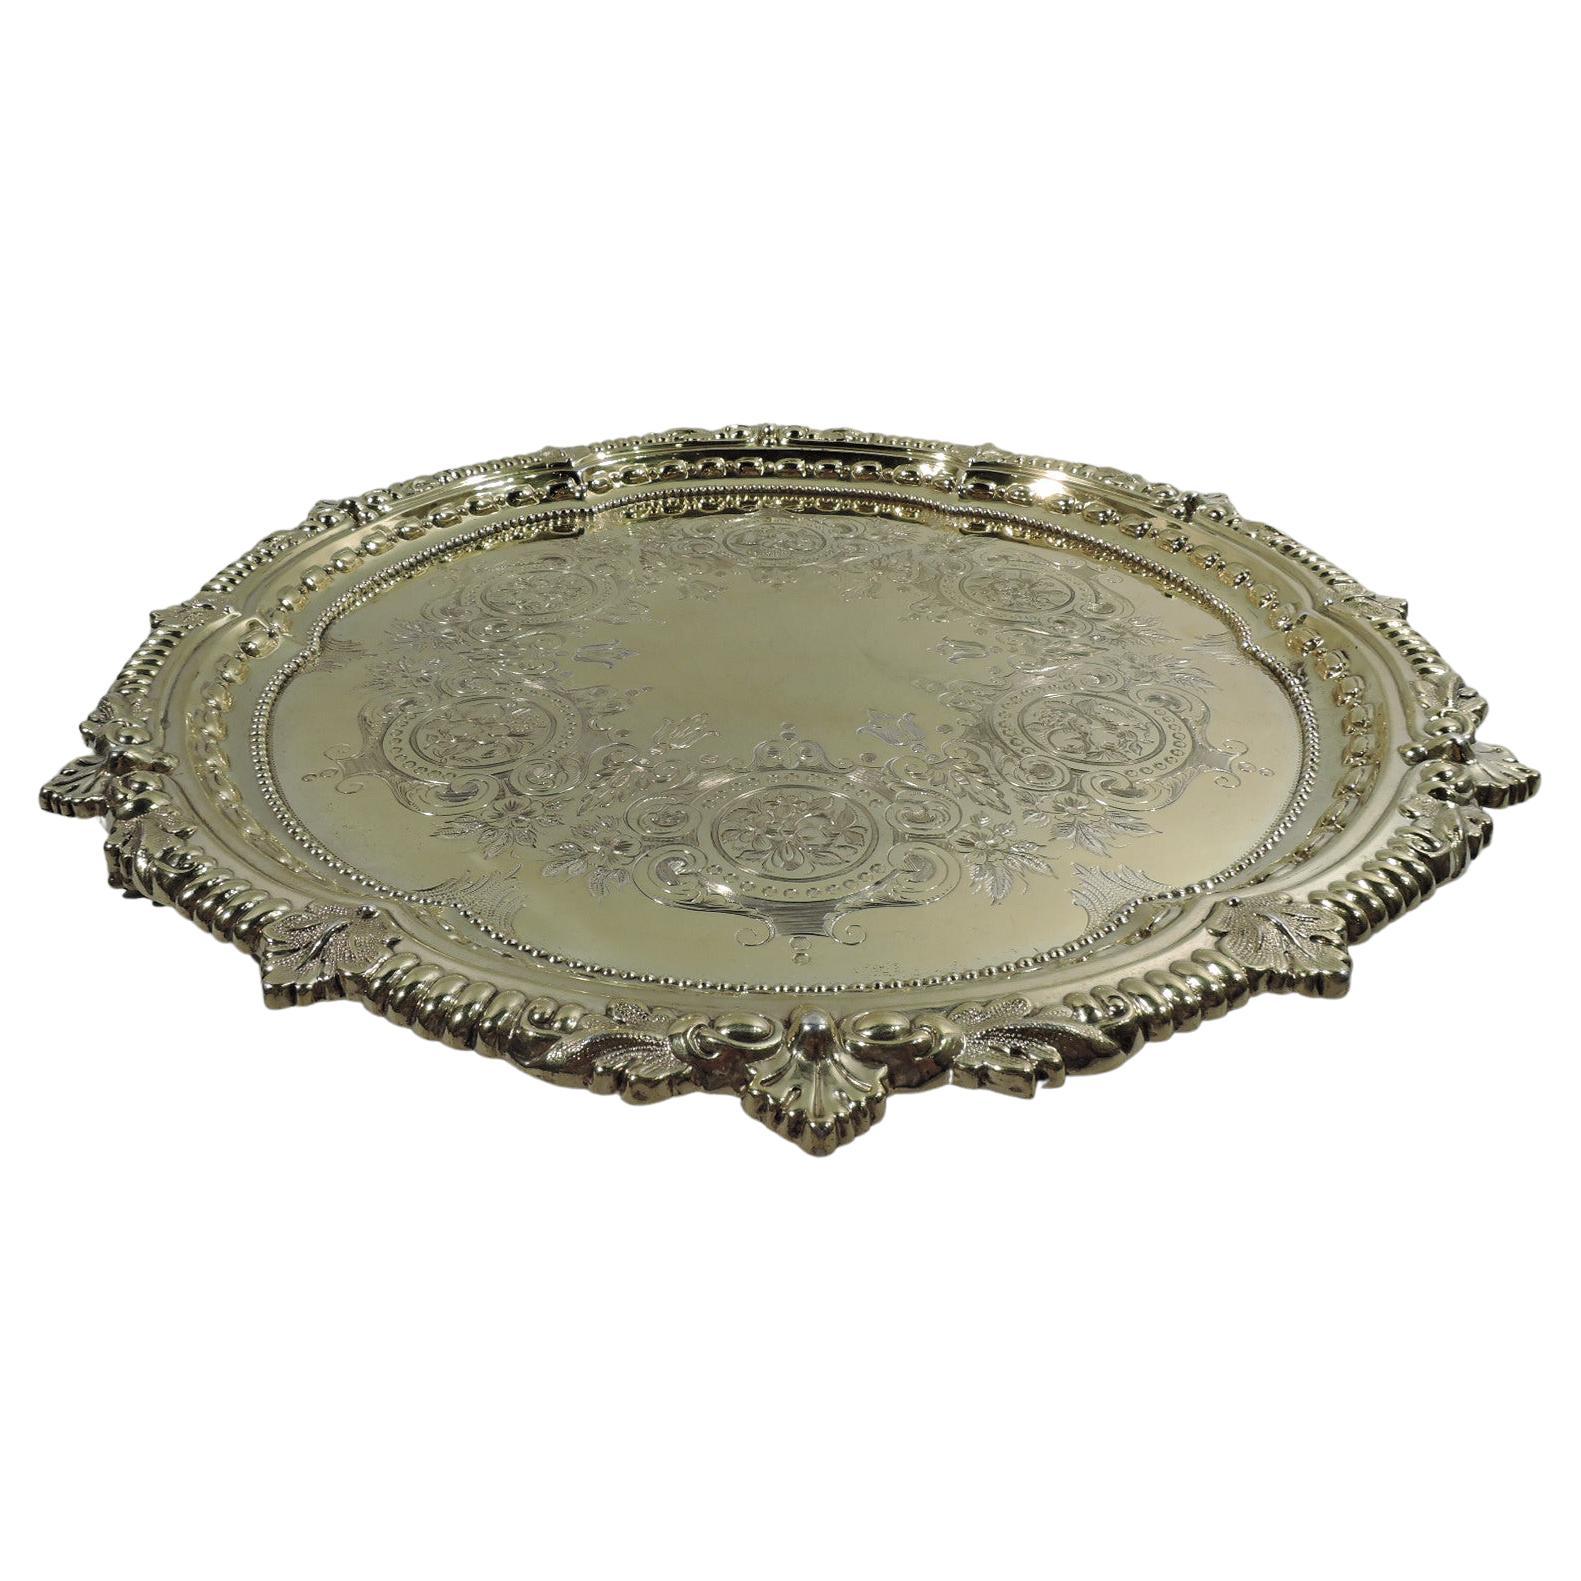 Sumptuous Regency Revival Gilt Sterling Silver Salver Tray by Howard